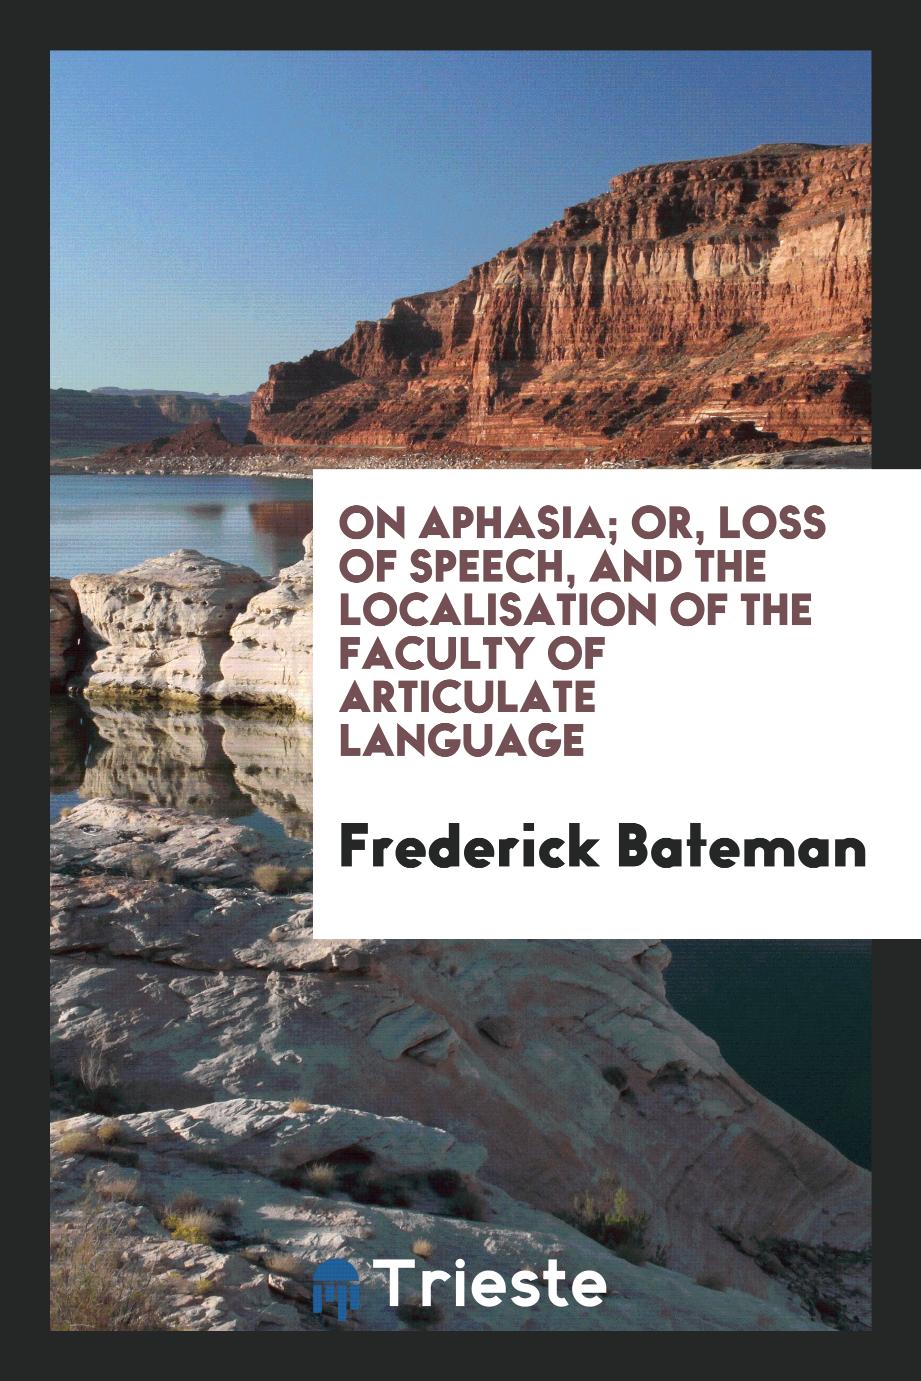 On Aphasia; Or, Loss of Speech, and the Localisation of the Faculty of Articulate Language